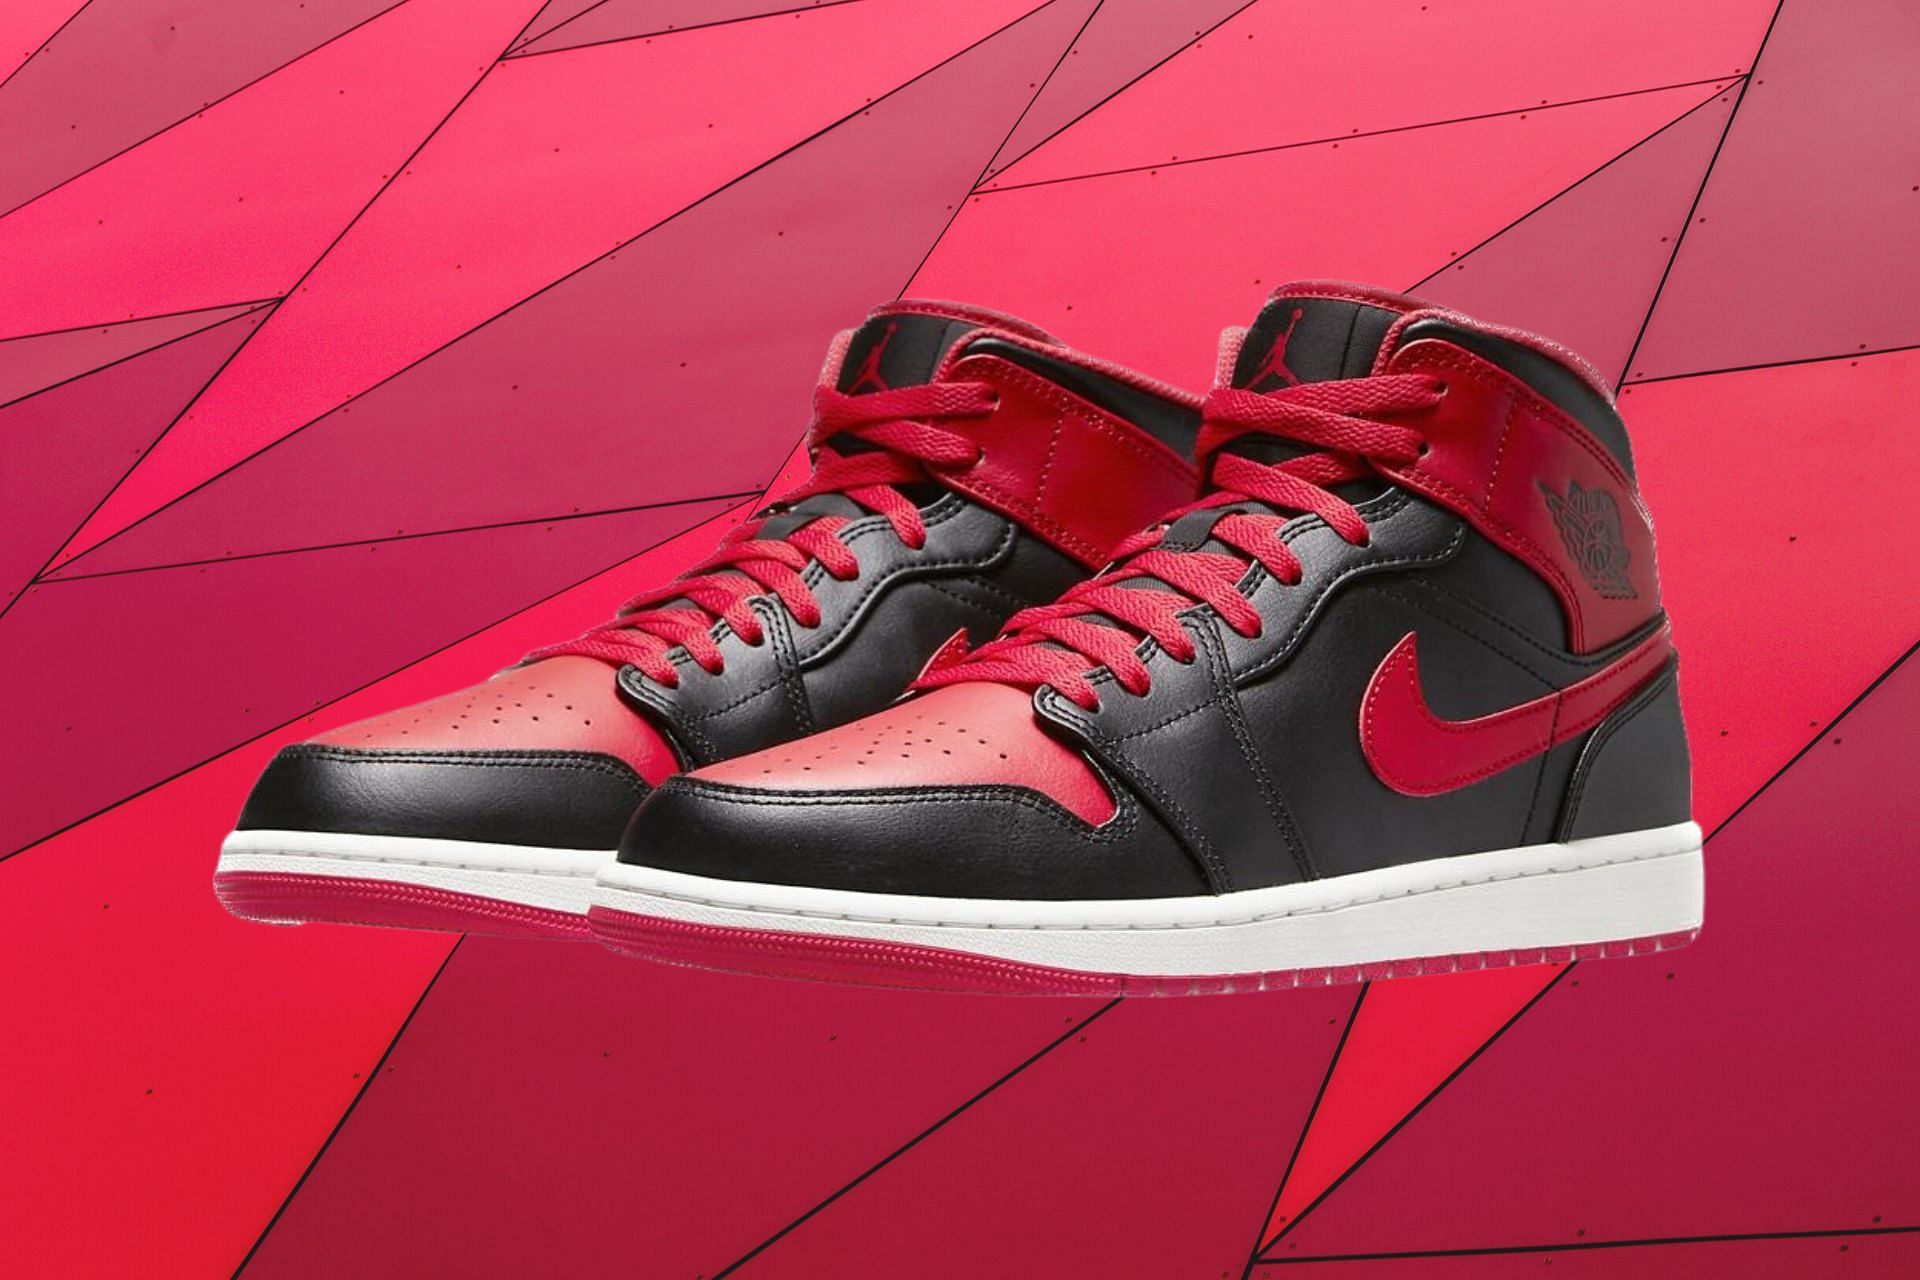 Bred: Air Jordan 1 Mid “Alternate Bred” shoes: Where to buy, price, and ...